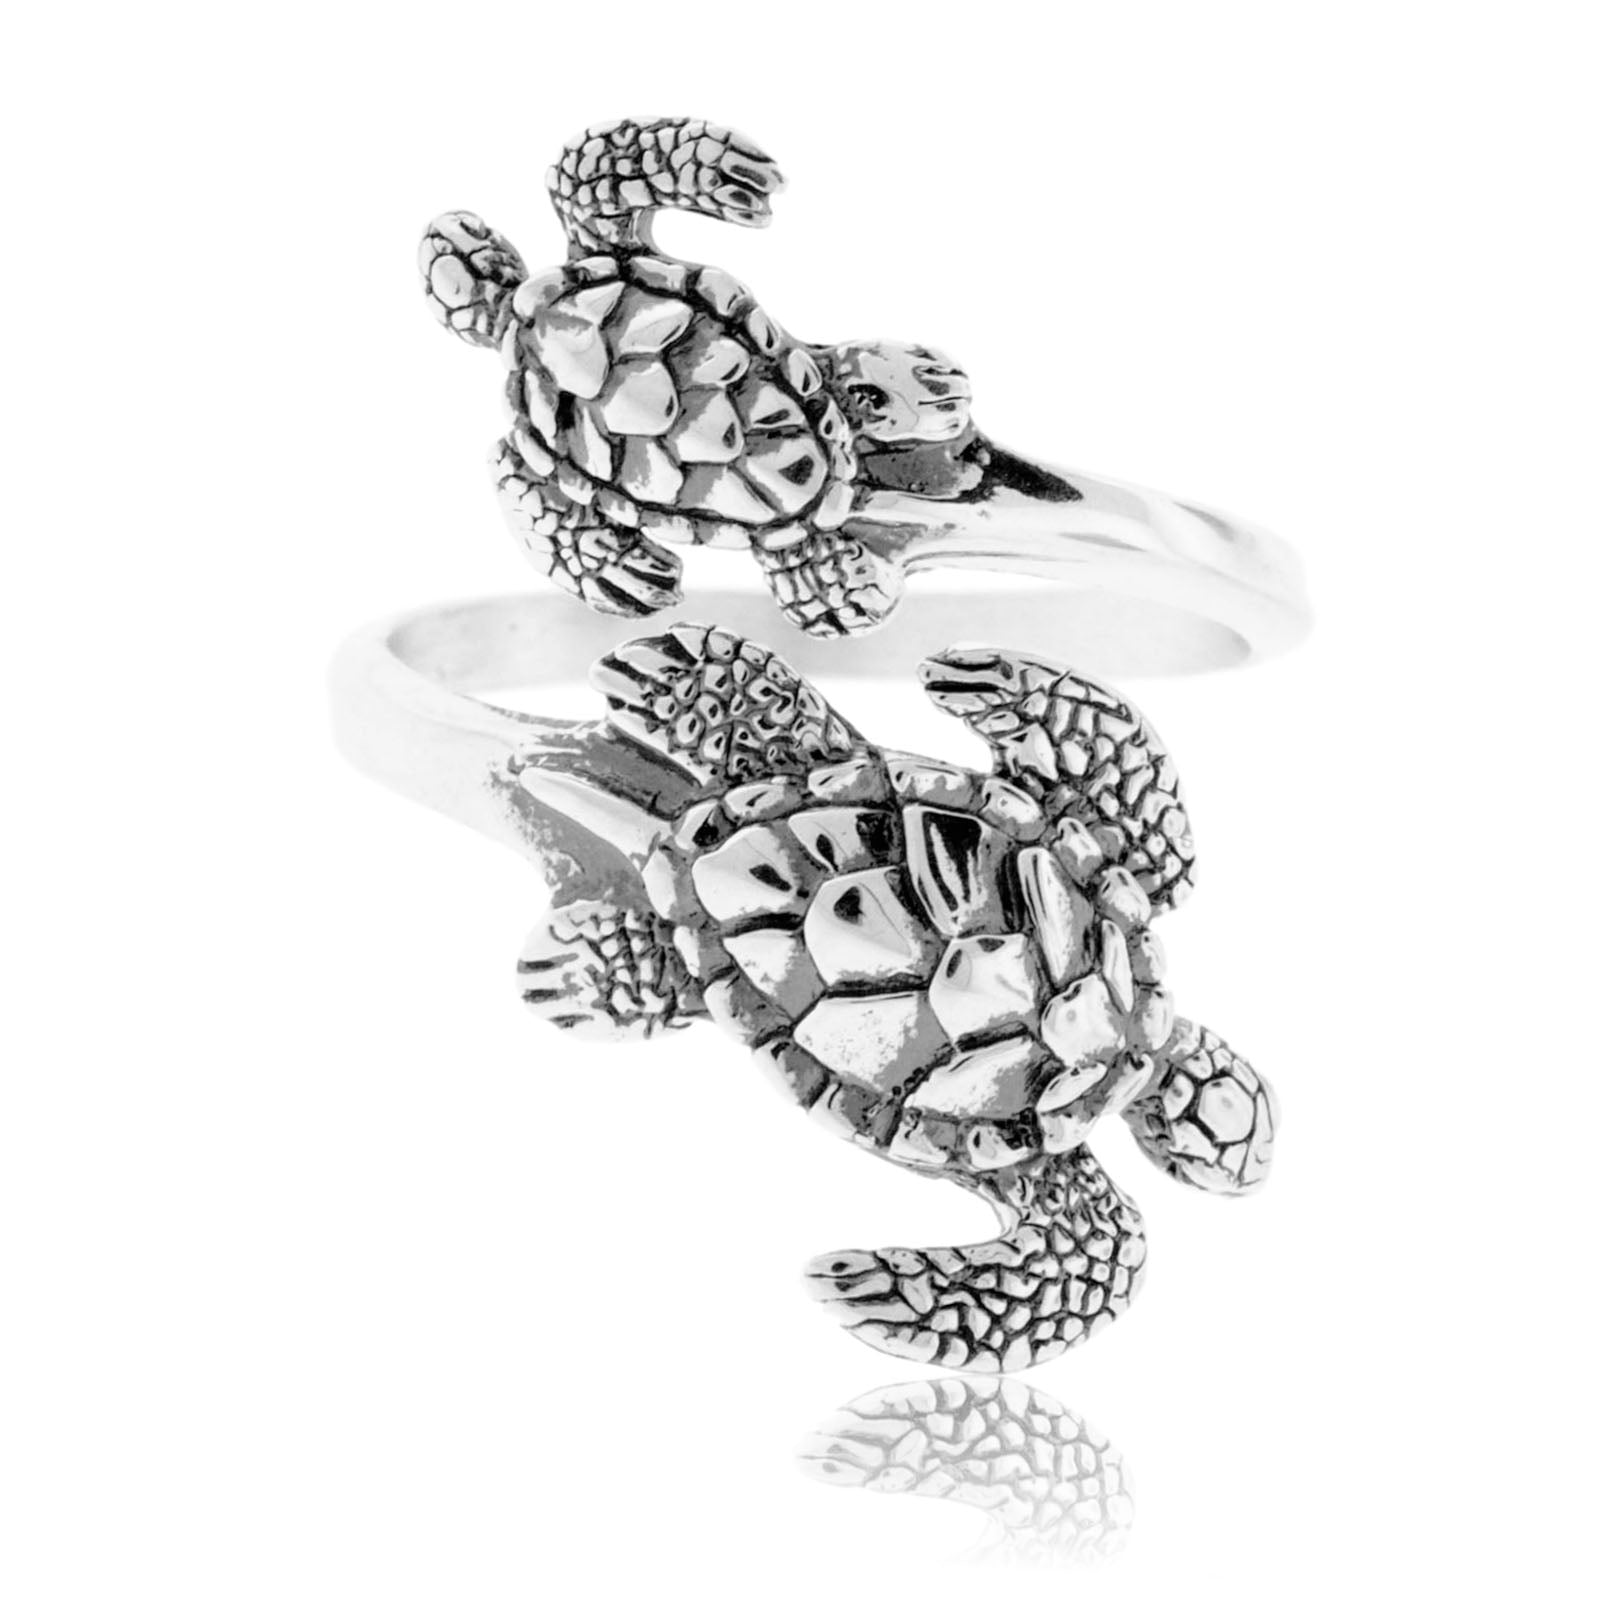 Vintage Sterling Silver Moving Turtle Ring Size 7 - Ruby Lane